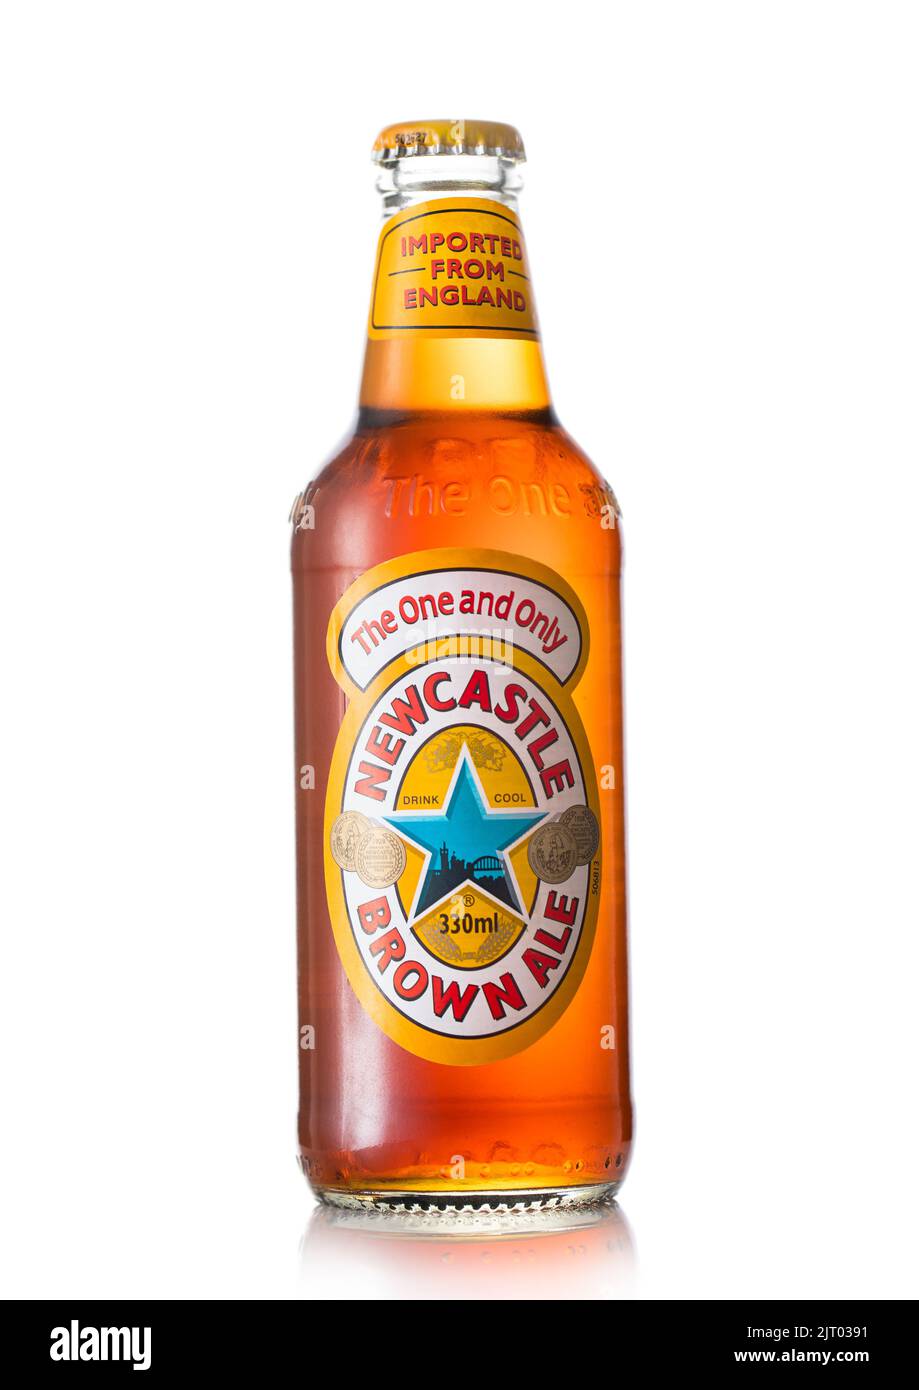 LONDON, UK - JULY 06, 2022: Bottle of New Castle brown ale beer on white. Stock Photo